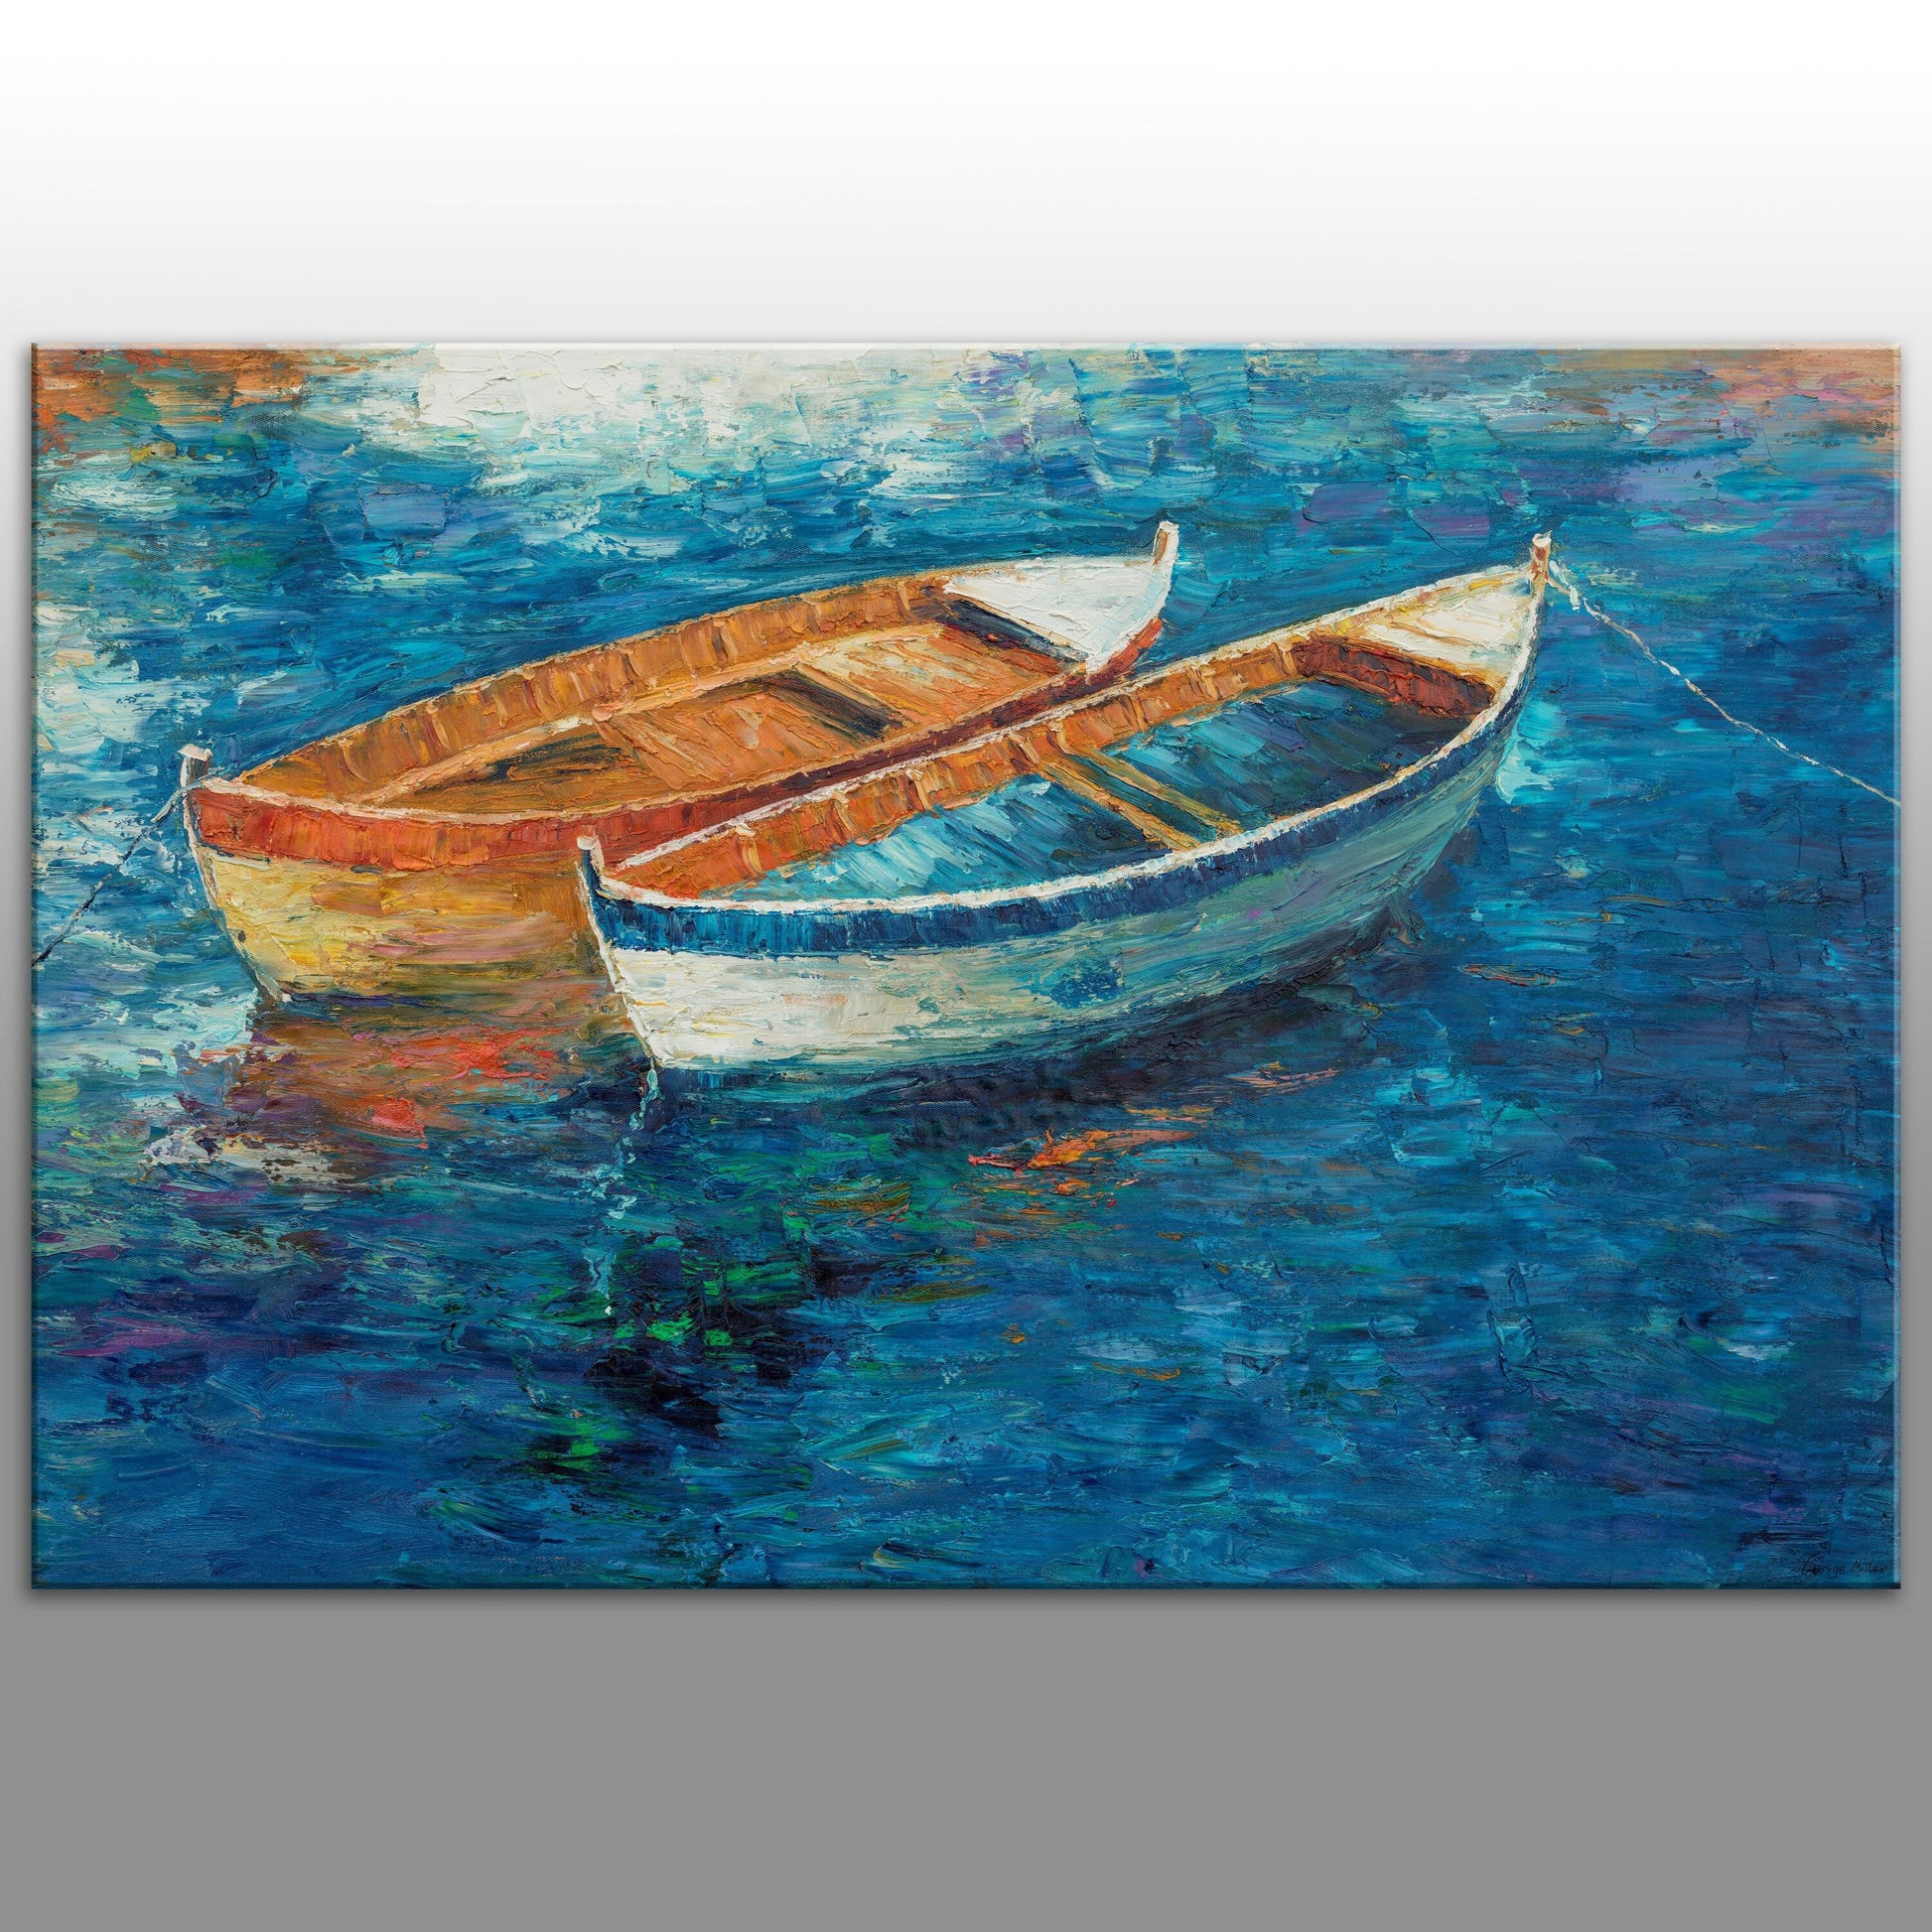 Fishing Boat Seascape: Large Abstract Oil Painting, 32x48 inches